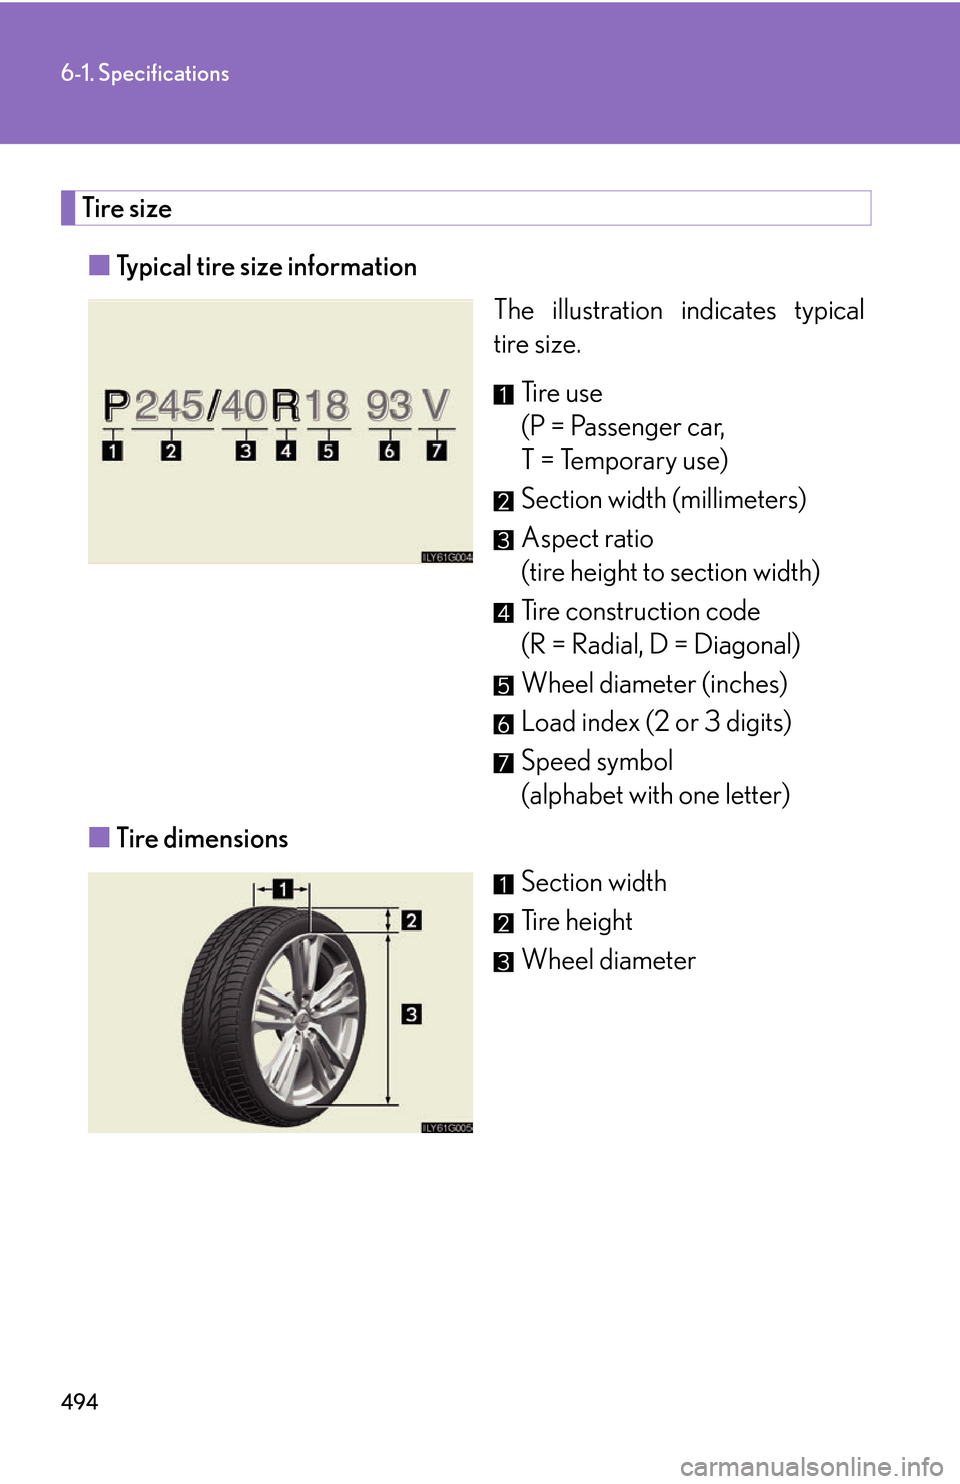 Lexus GS450h 2007  Driving Comfort TOC / LEXUS 2007 GS450H THROUGH JUNE 2006 PROD. OWNERS MANUAL (OM30727U) 494
6-1. Specifications
Tire size
■Typical tire size information
The illustration indicates typical 
tir
e size.
Ti r e  u s e 
(P = Passenger car, 
T = Temporary use)
Section width (millimete